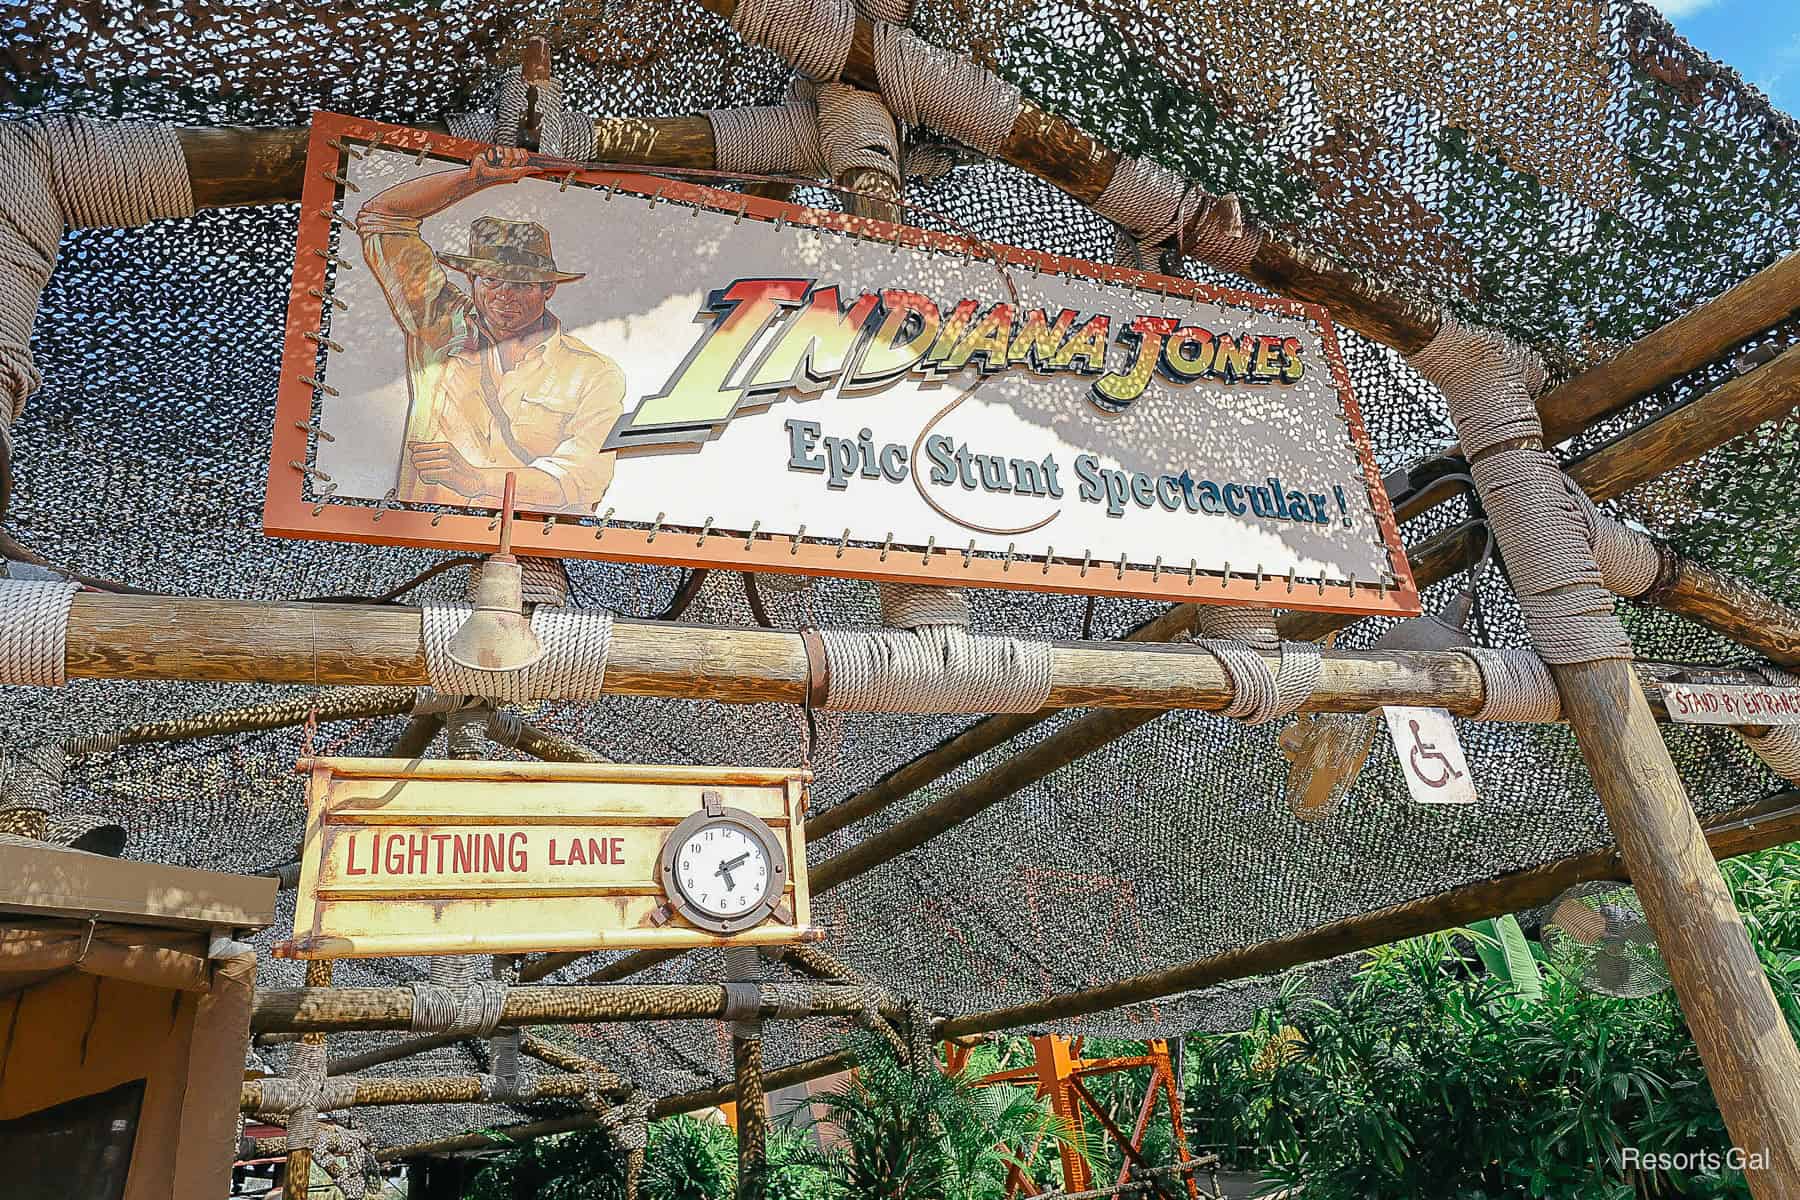 Guide to Indiana Jones Epic Stunt Spectacular Show at Disney World